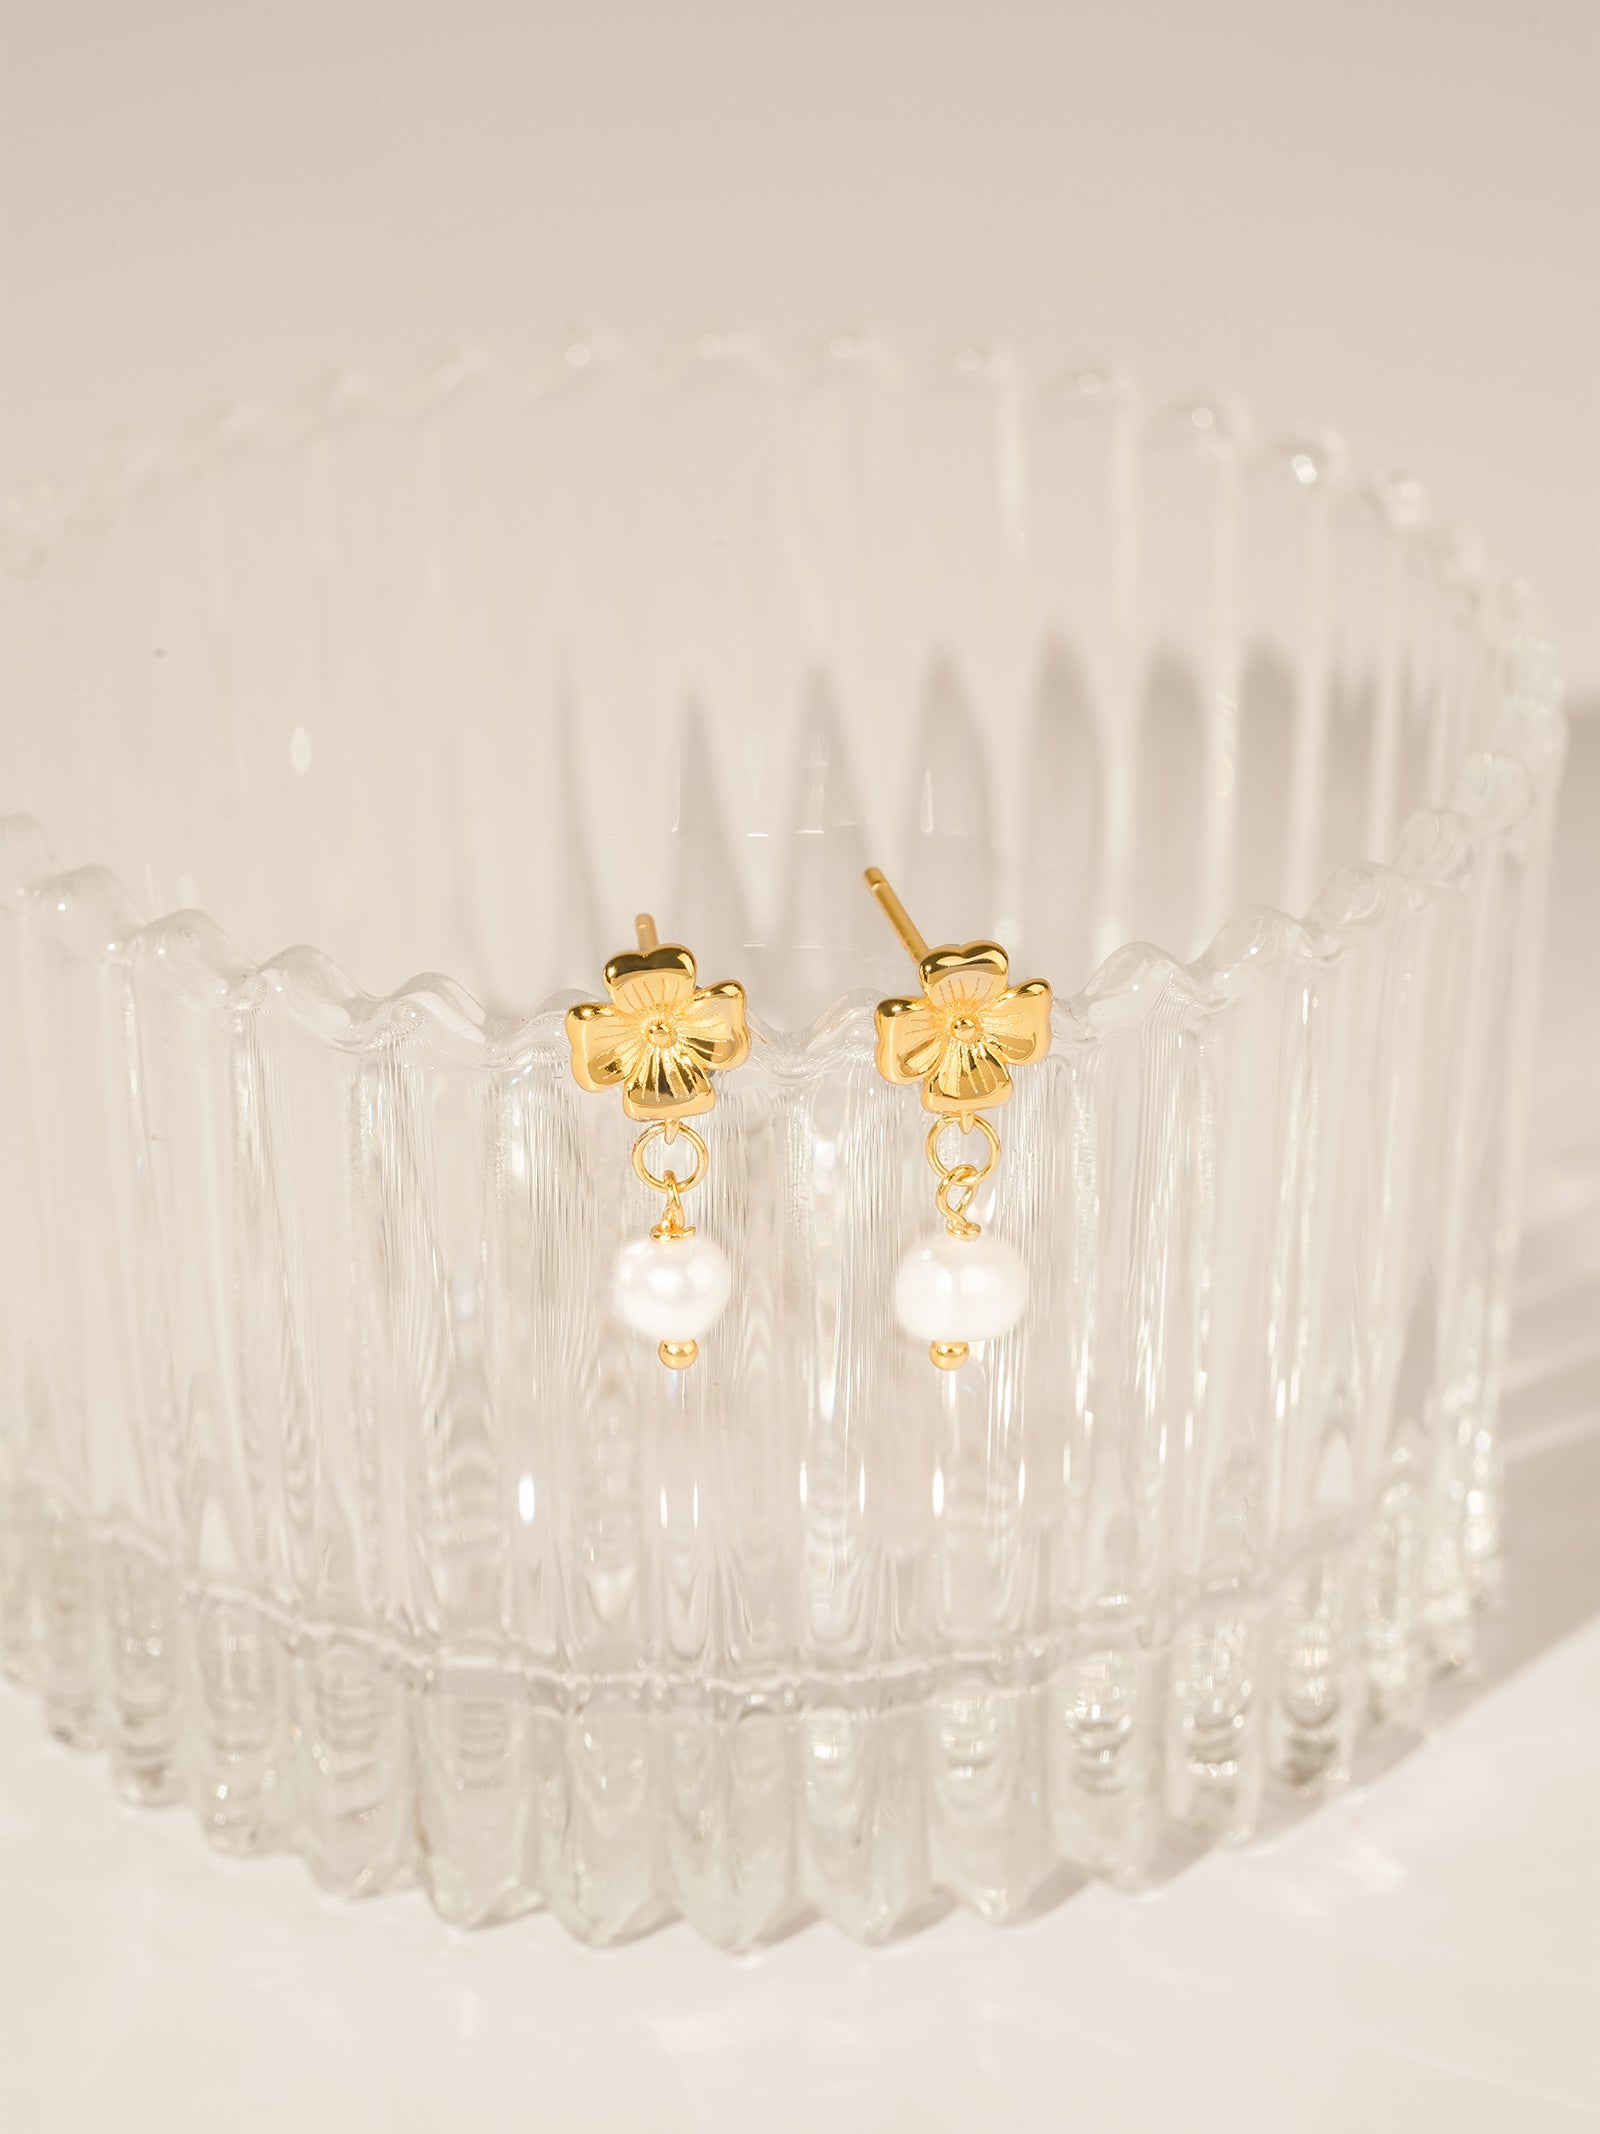 Tender Objects Fleur Pearl Drop Studs - Graceful earrings with delicate pearl drops, embodying timeless elegance for a sophisticated and chic look.